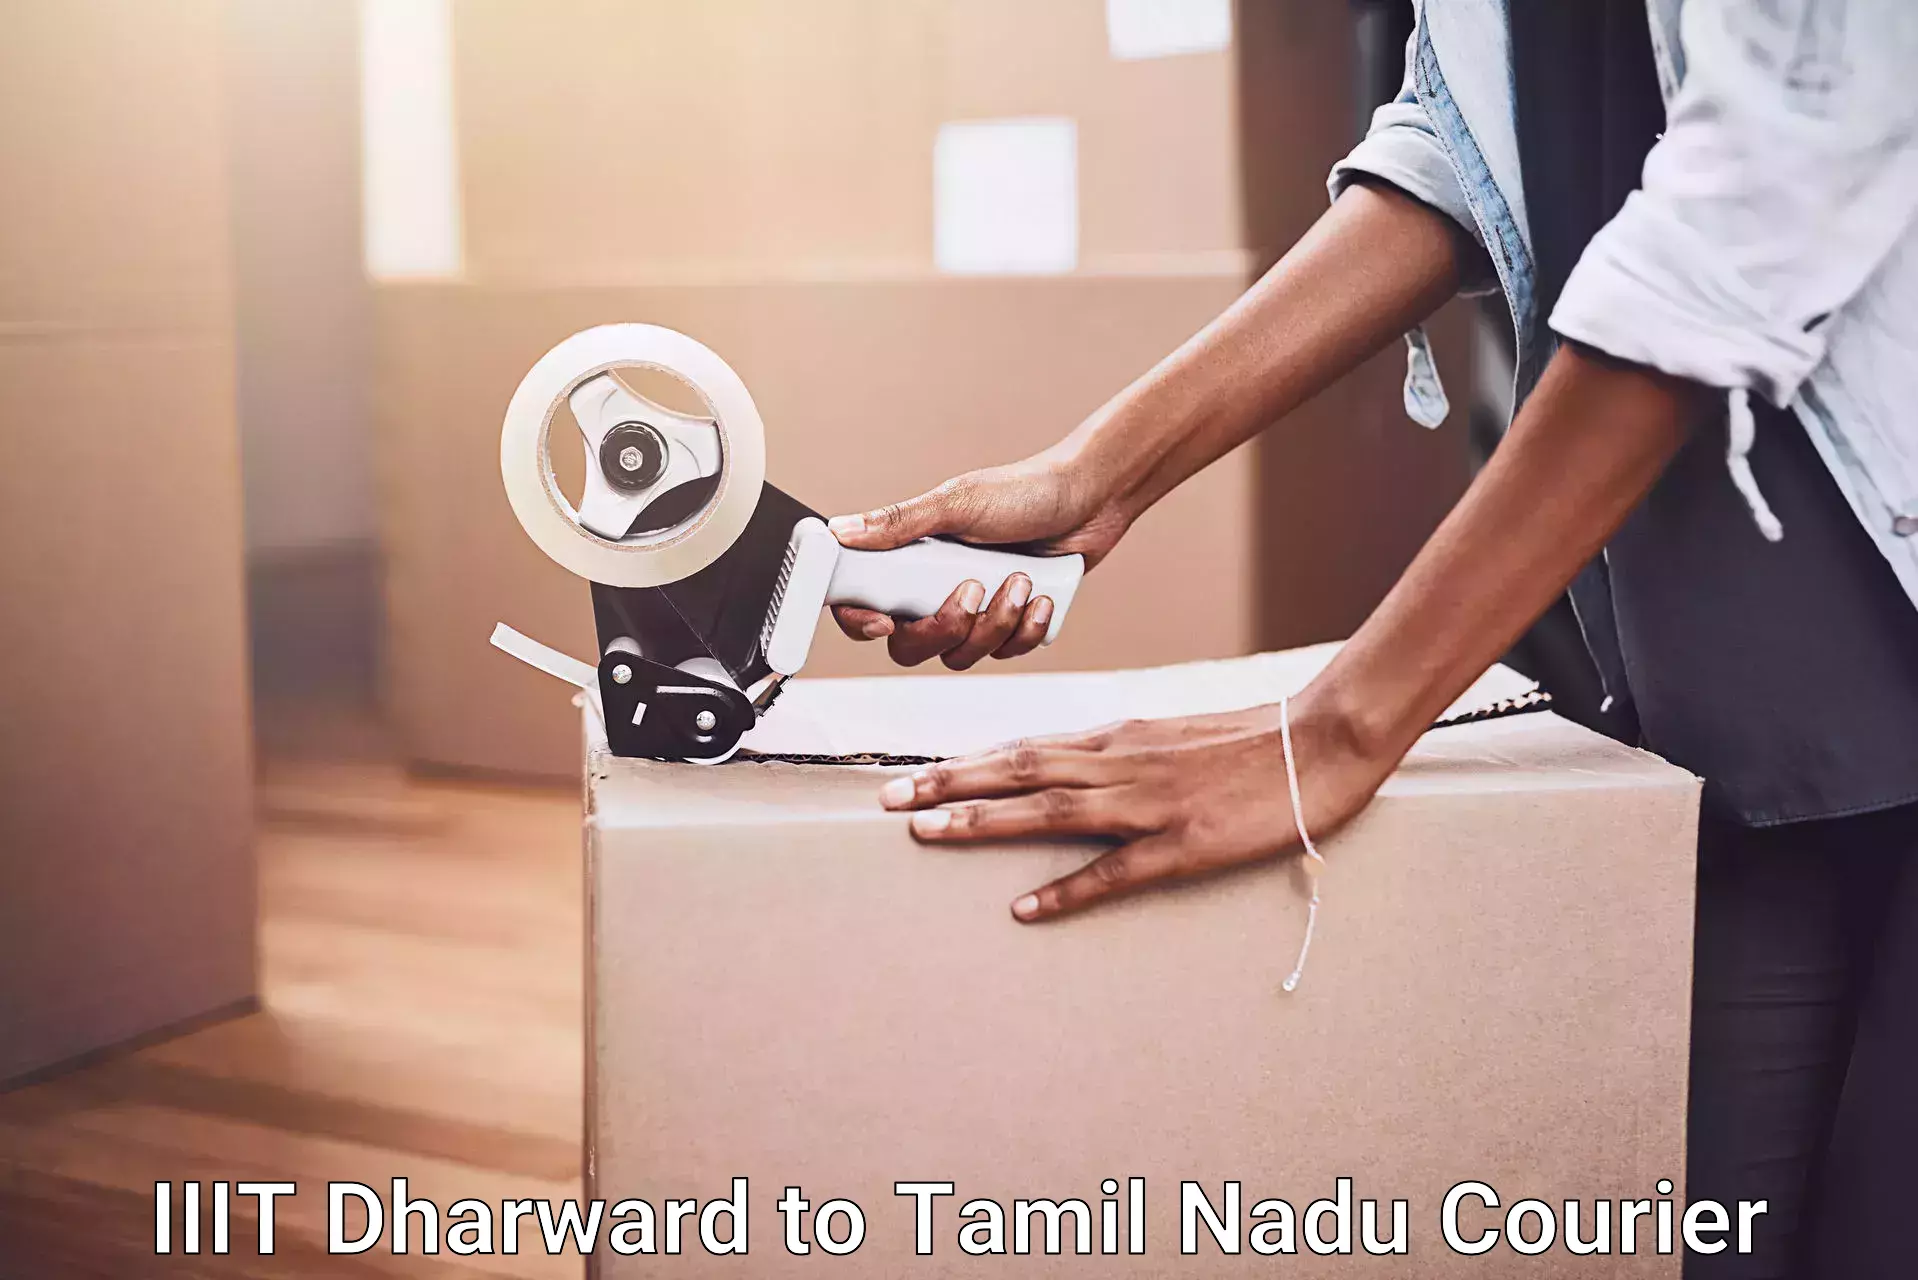 Personalized relocation plans IIIT Dharward to Tamil Nadu